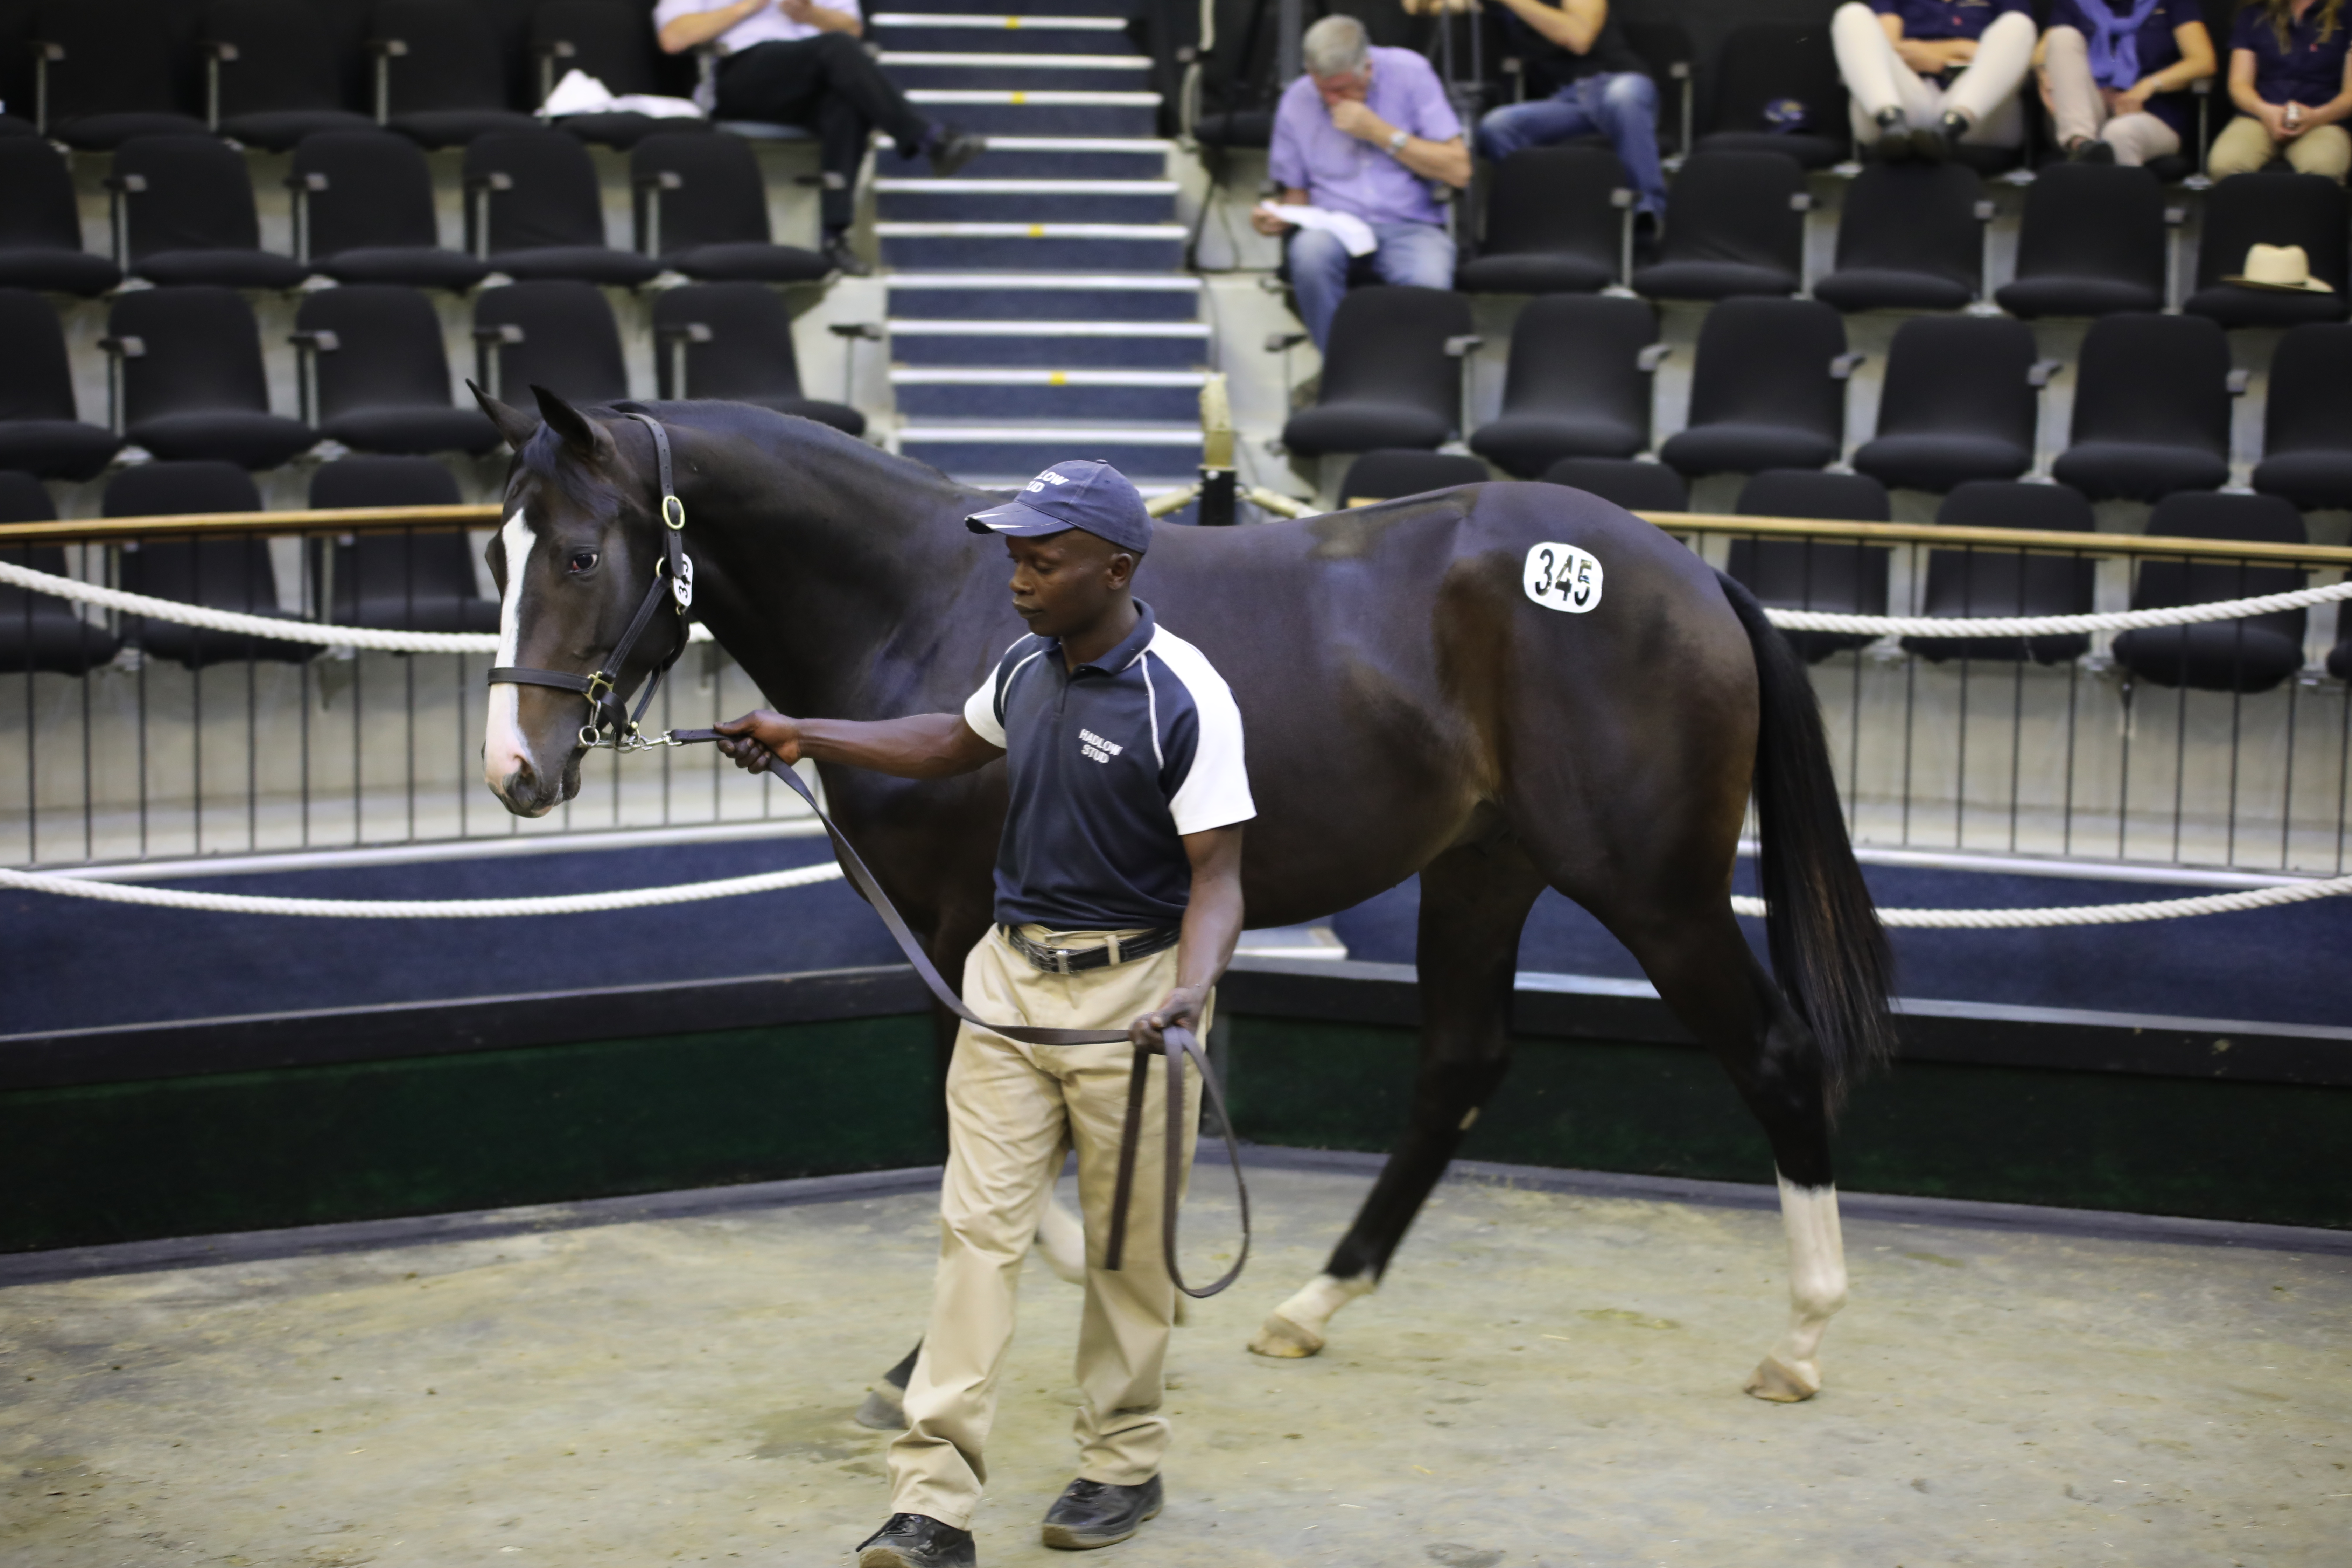 Press Release: National Yearling Sale Moved To May